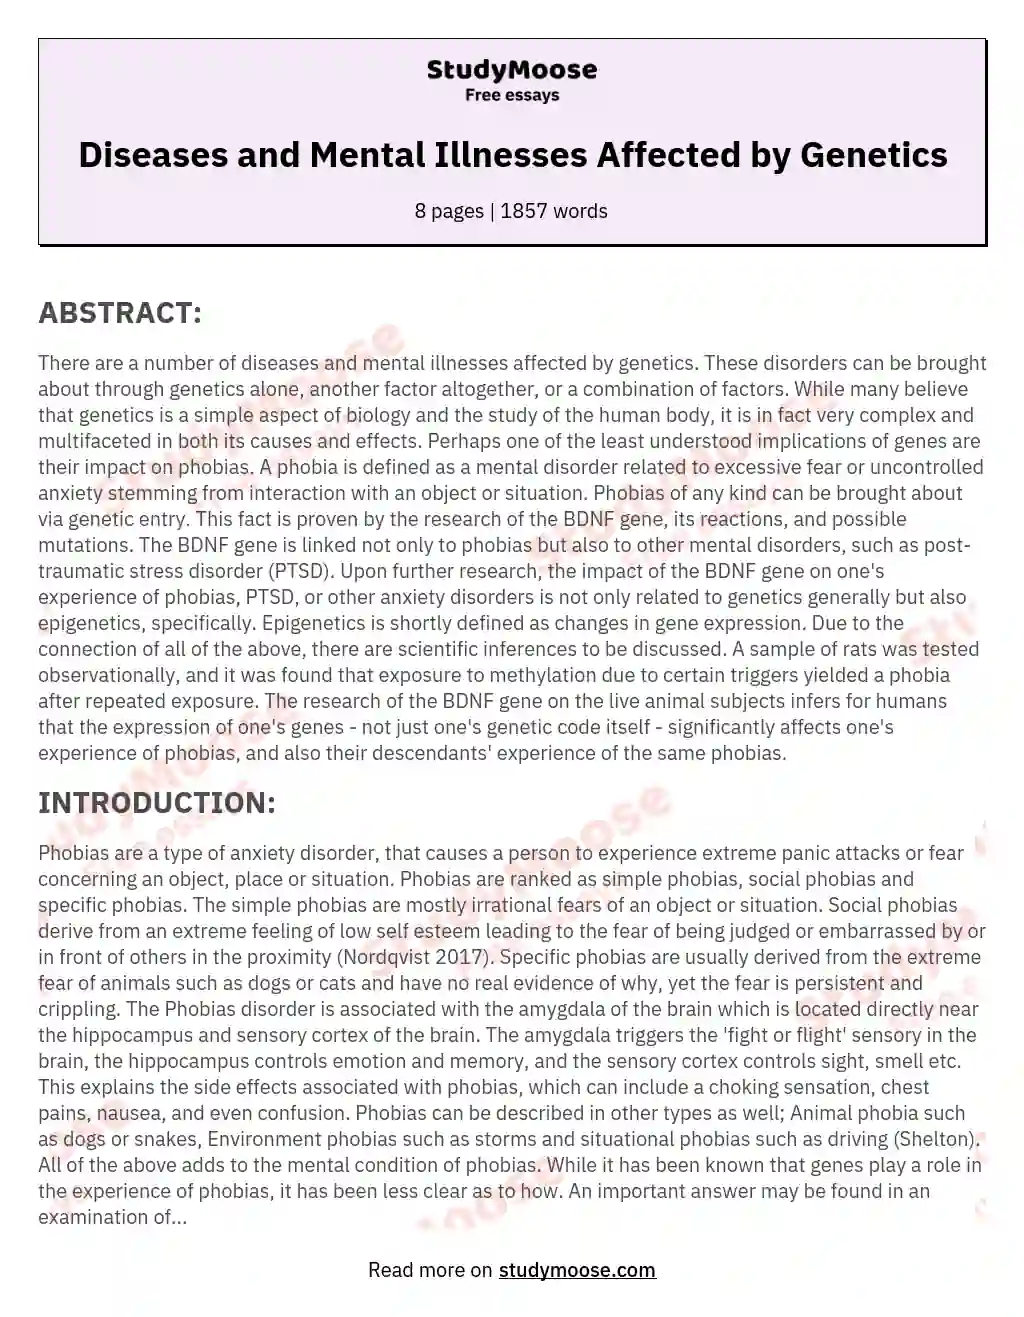 Diseases and Mental Illnesses Affected by Genetics